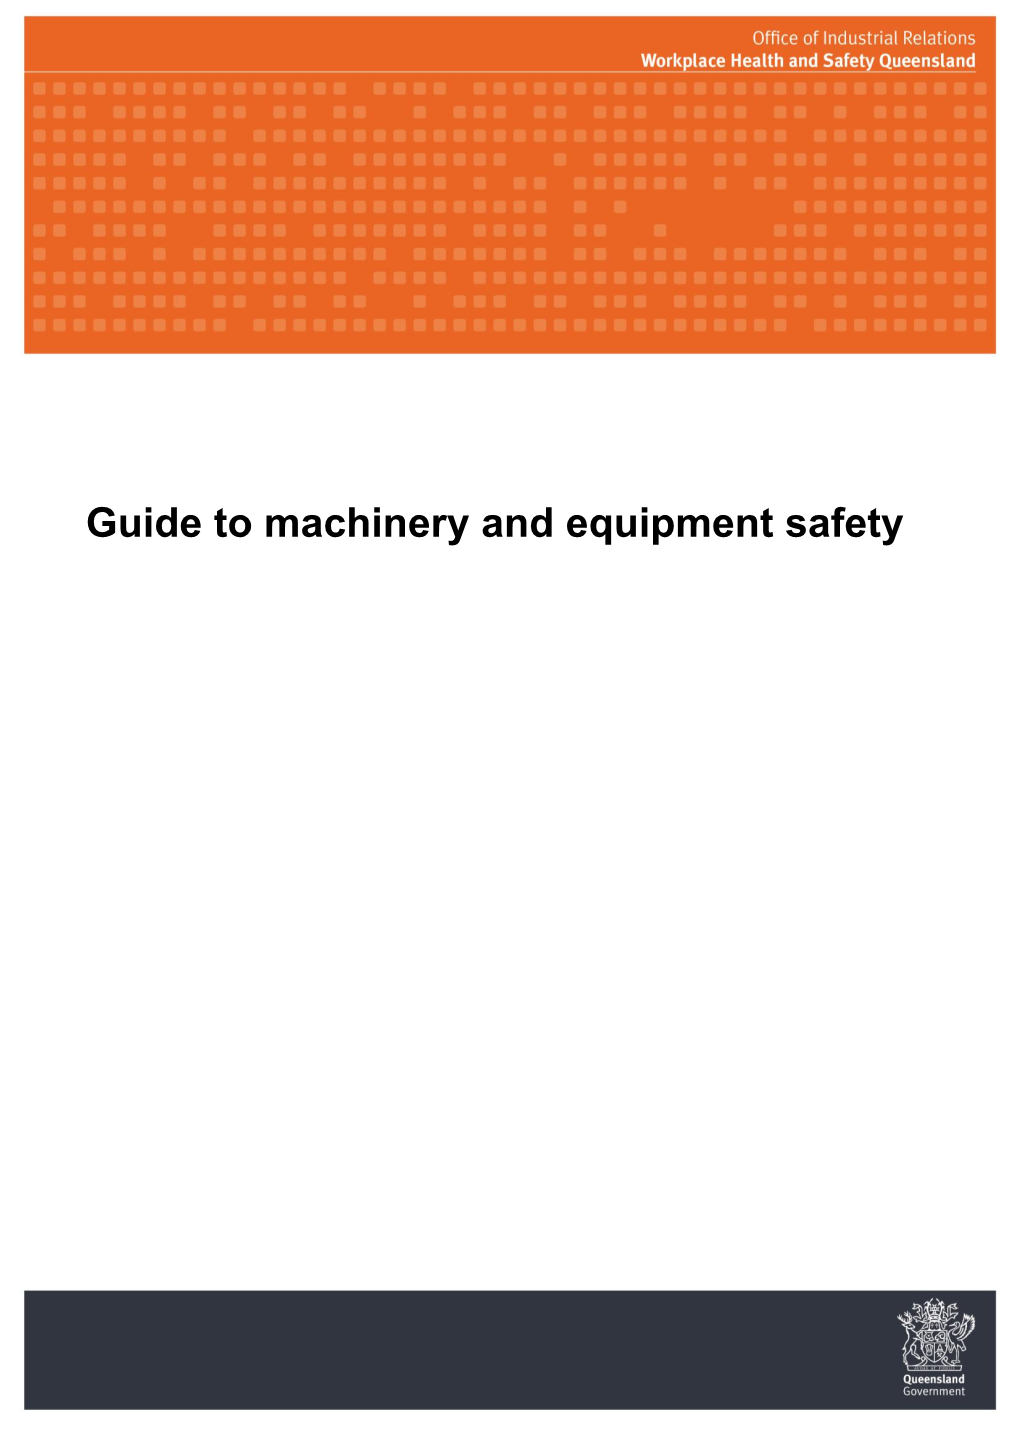 Guide to Machinery and Equipment Safety